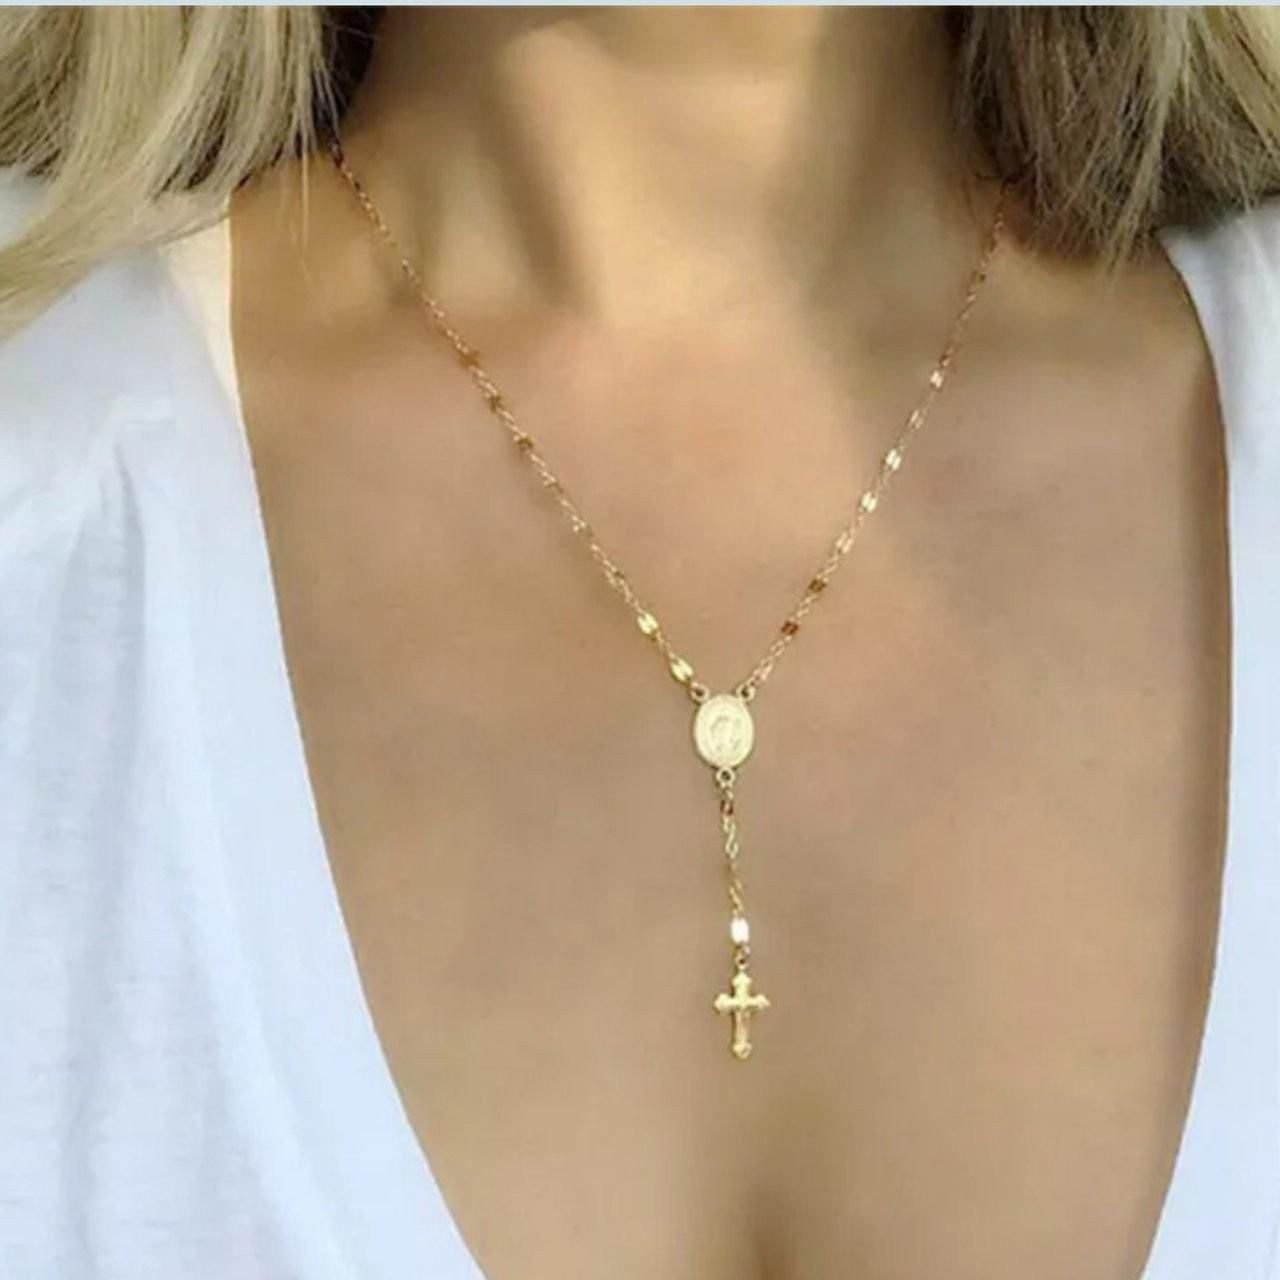 Gold Plated Catholic Rosary Necklace Virgin Mary & Cross of Jesus Pendant Necklace Chain